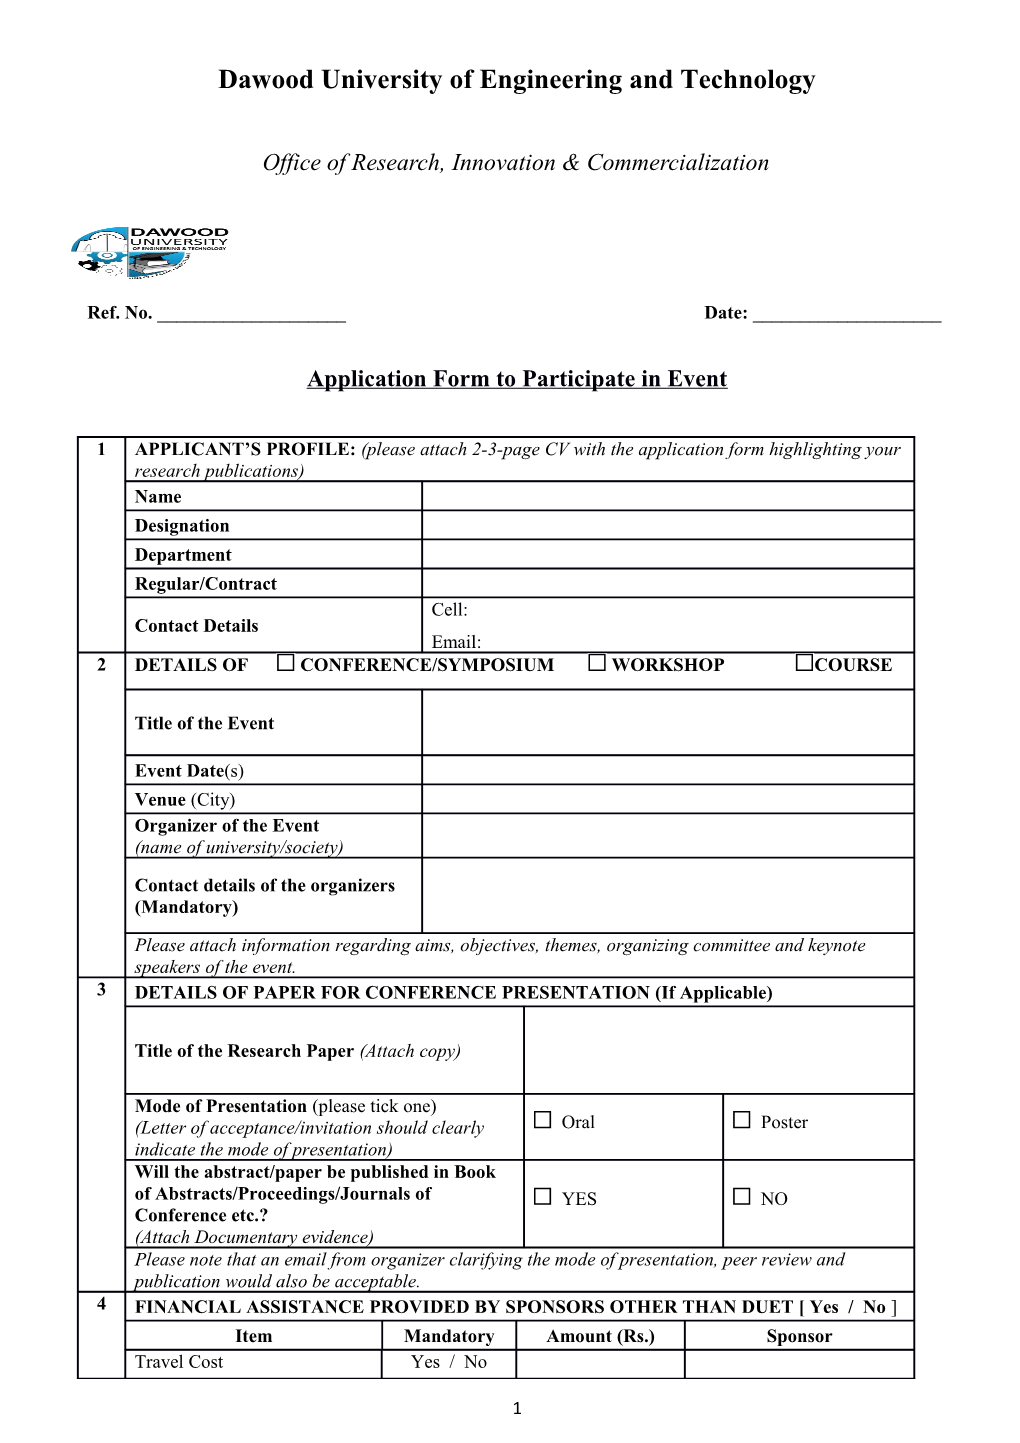 Application Form to Participate in Event